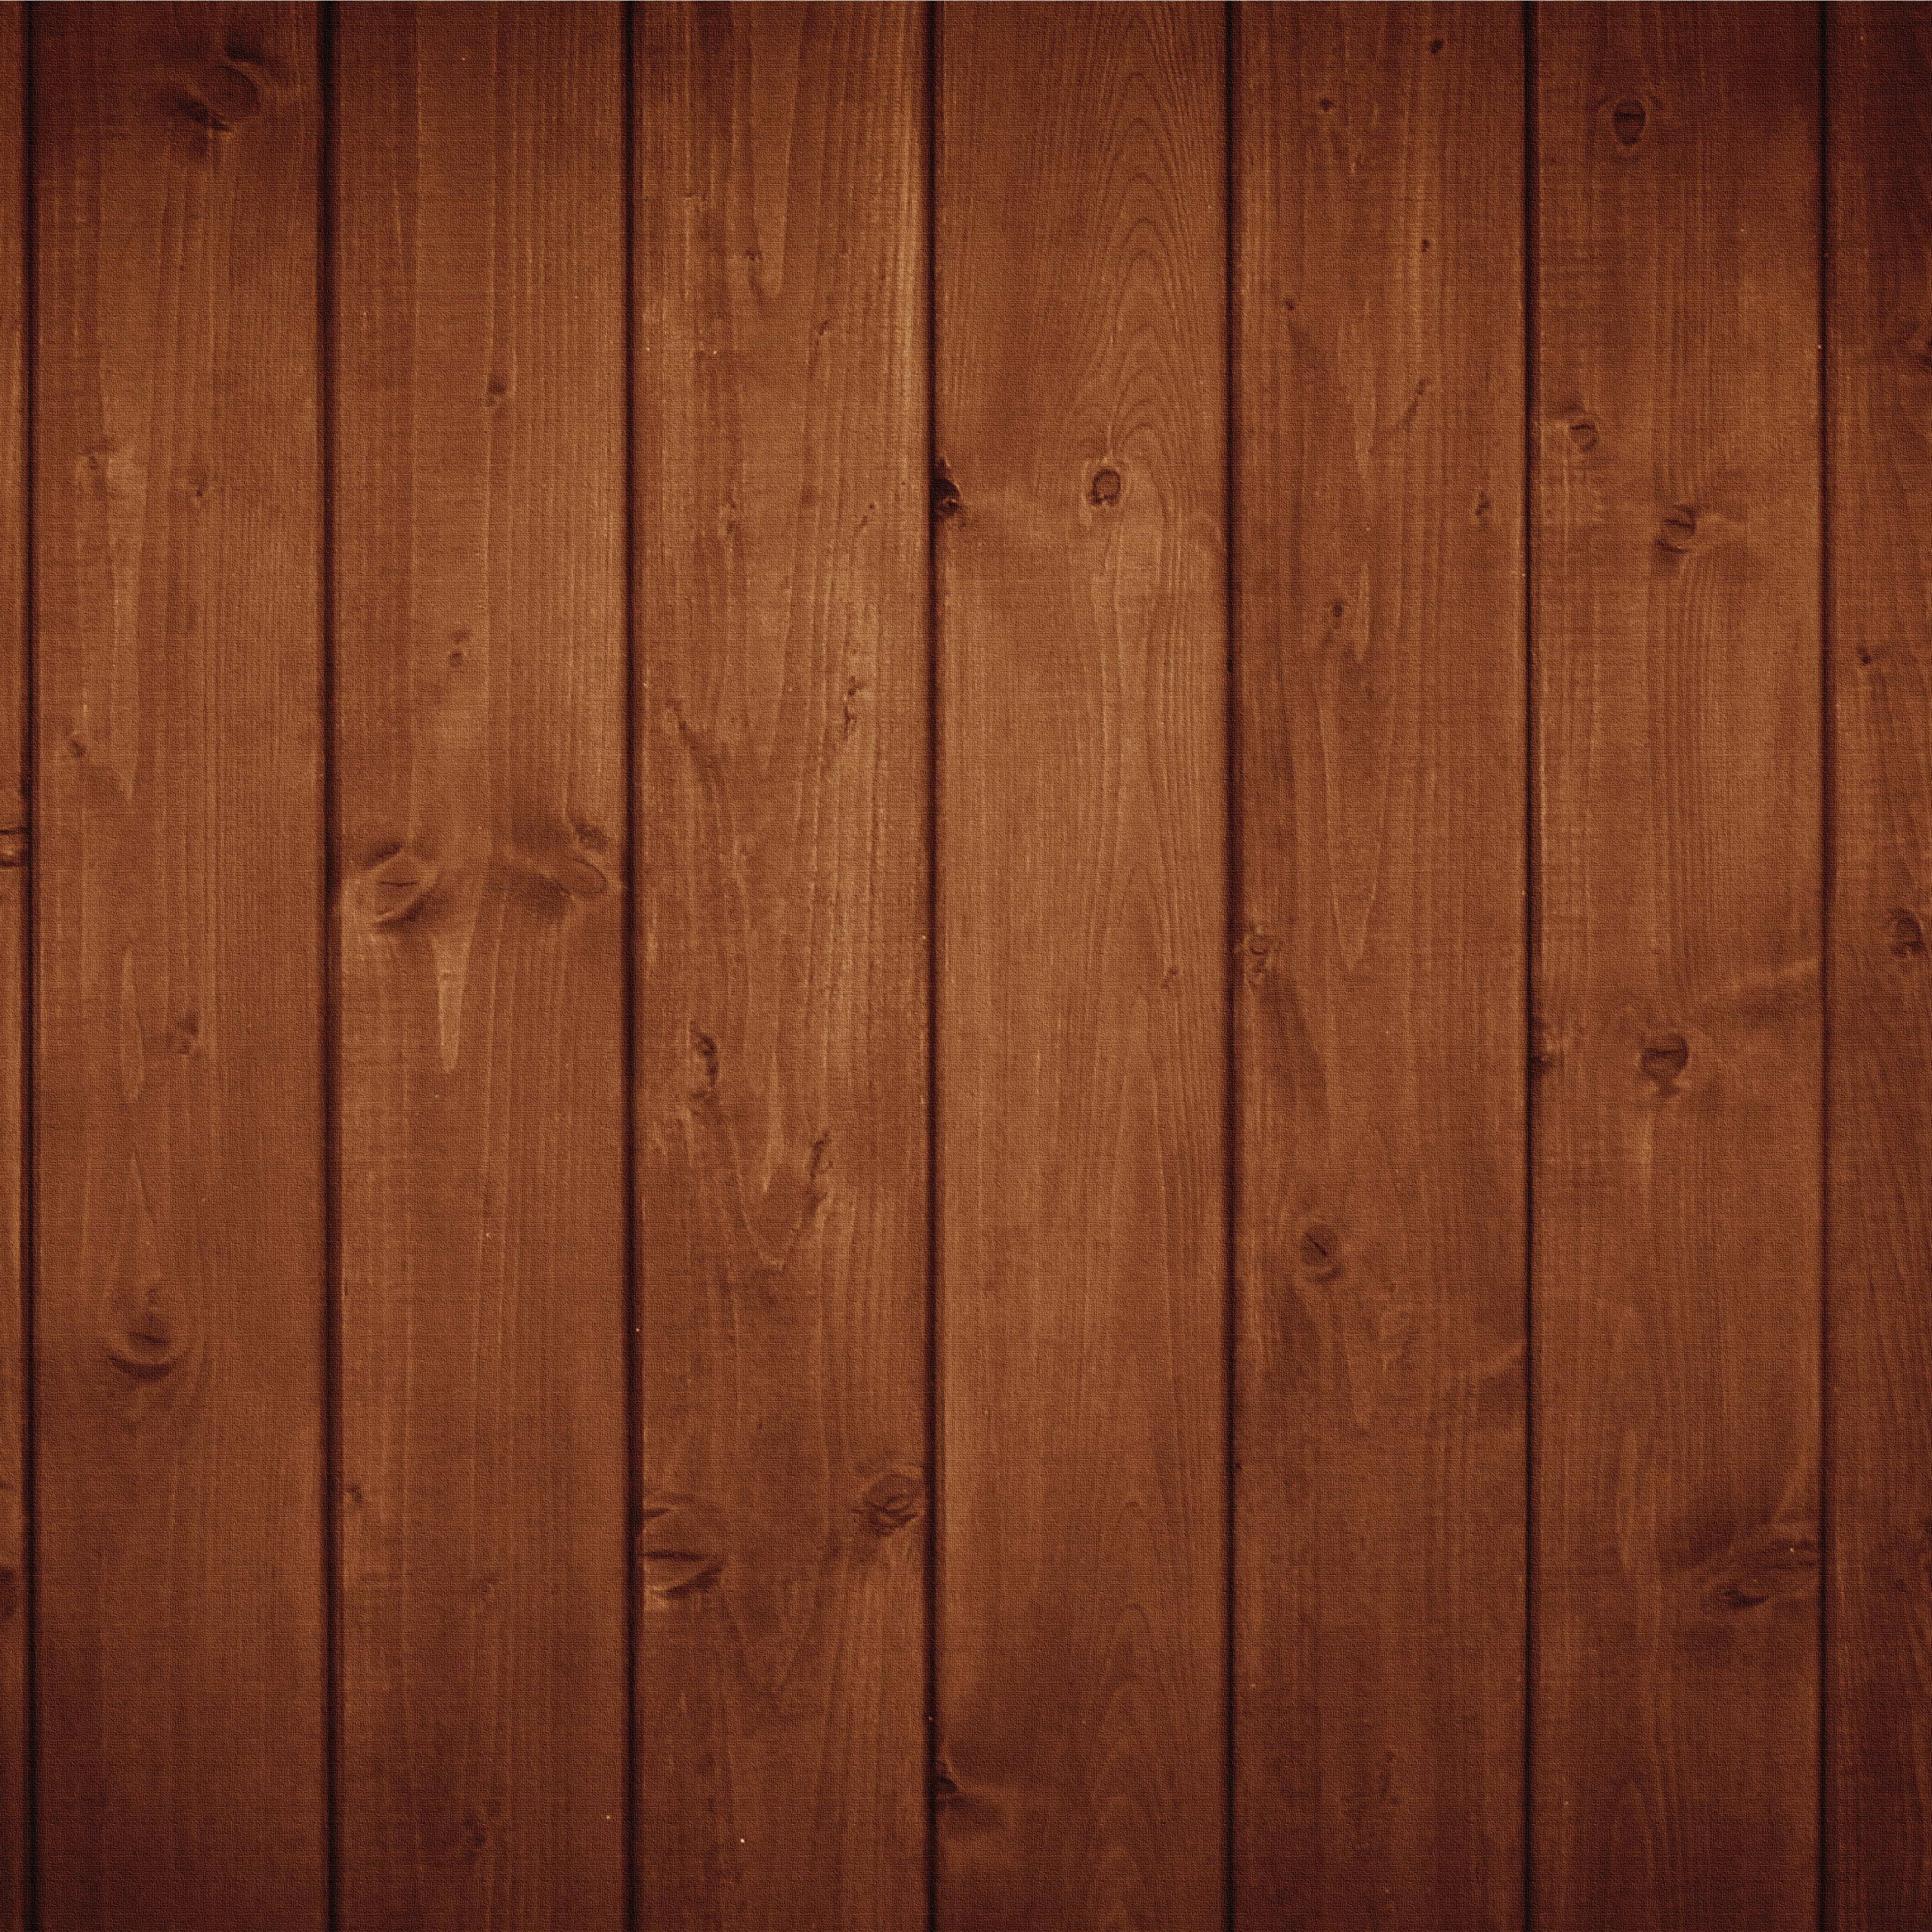 Wood Background Wallpaper, Download Photo, Background, - Moto Maxx , HD Wallpaper & Backgrounds